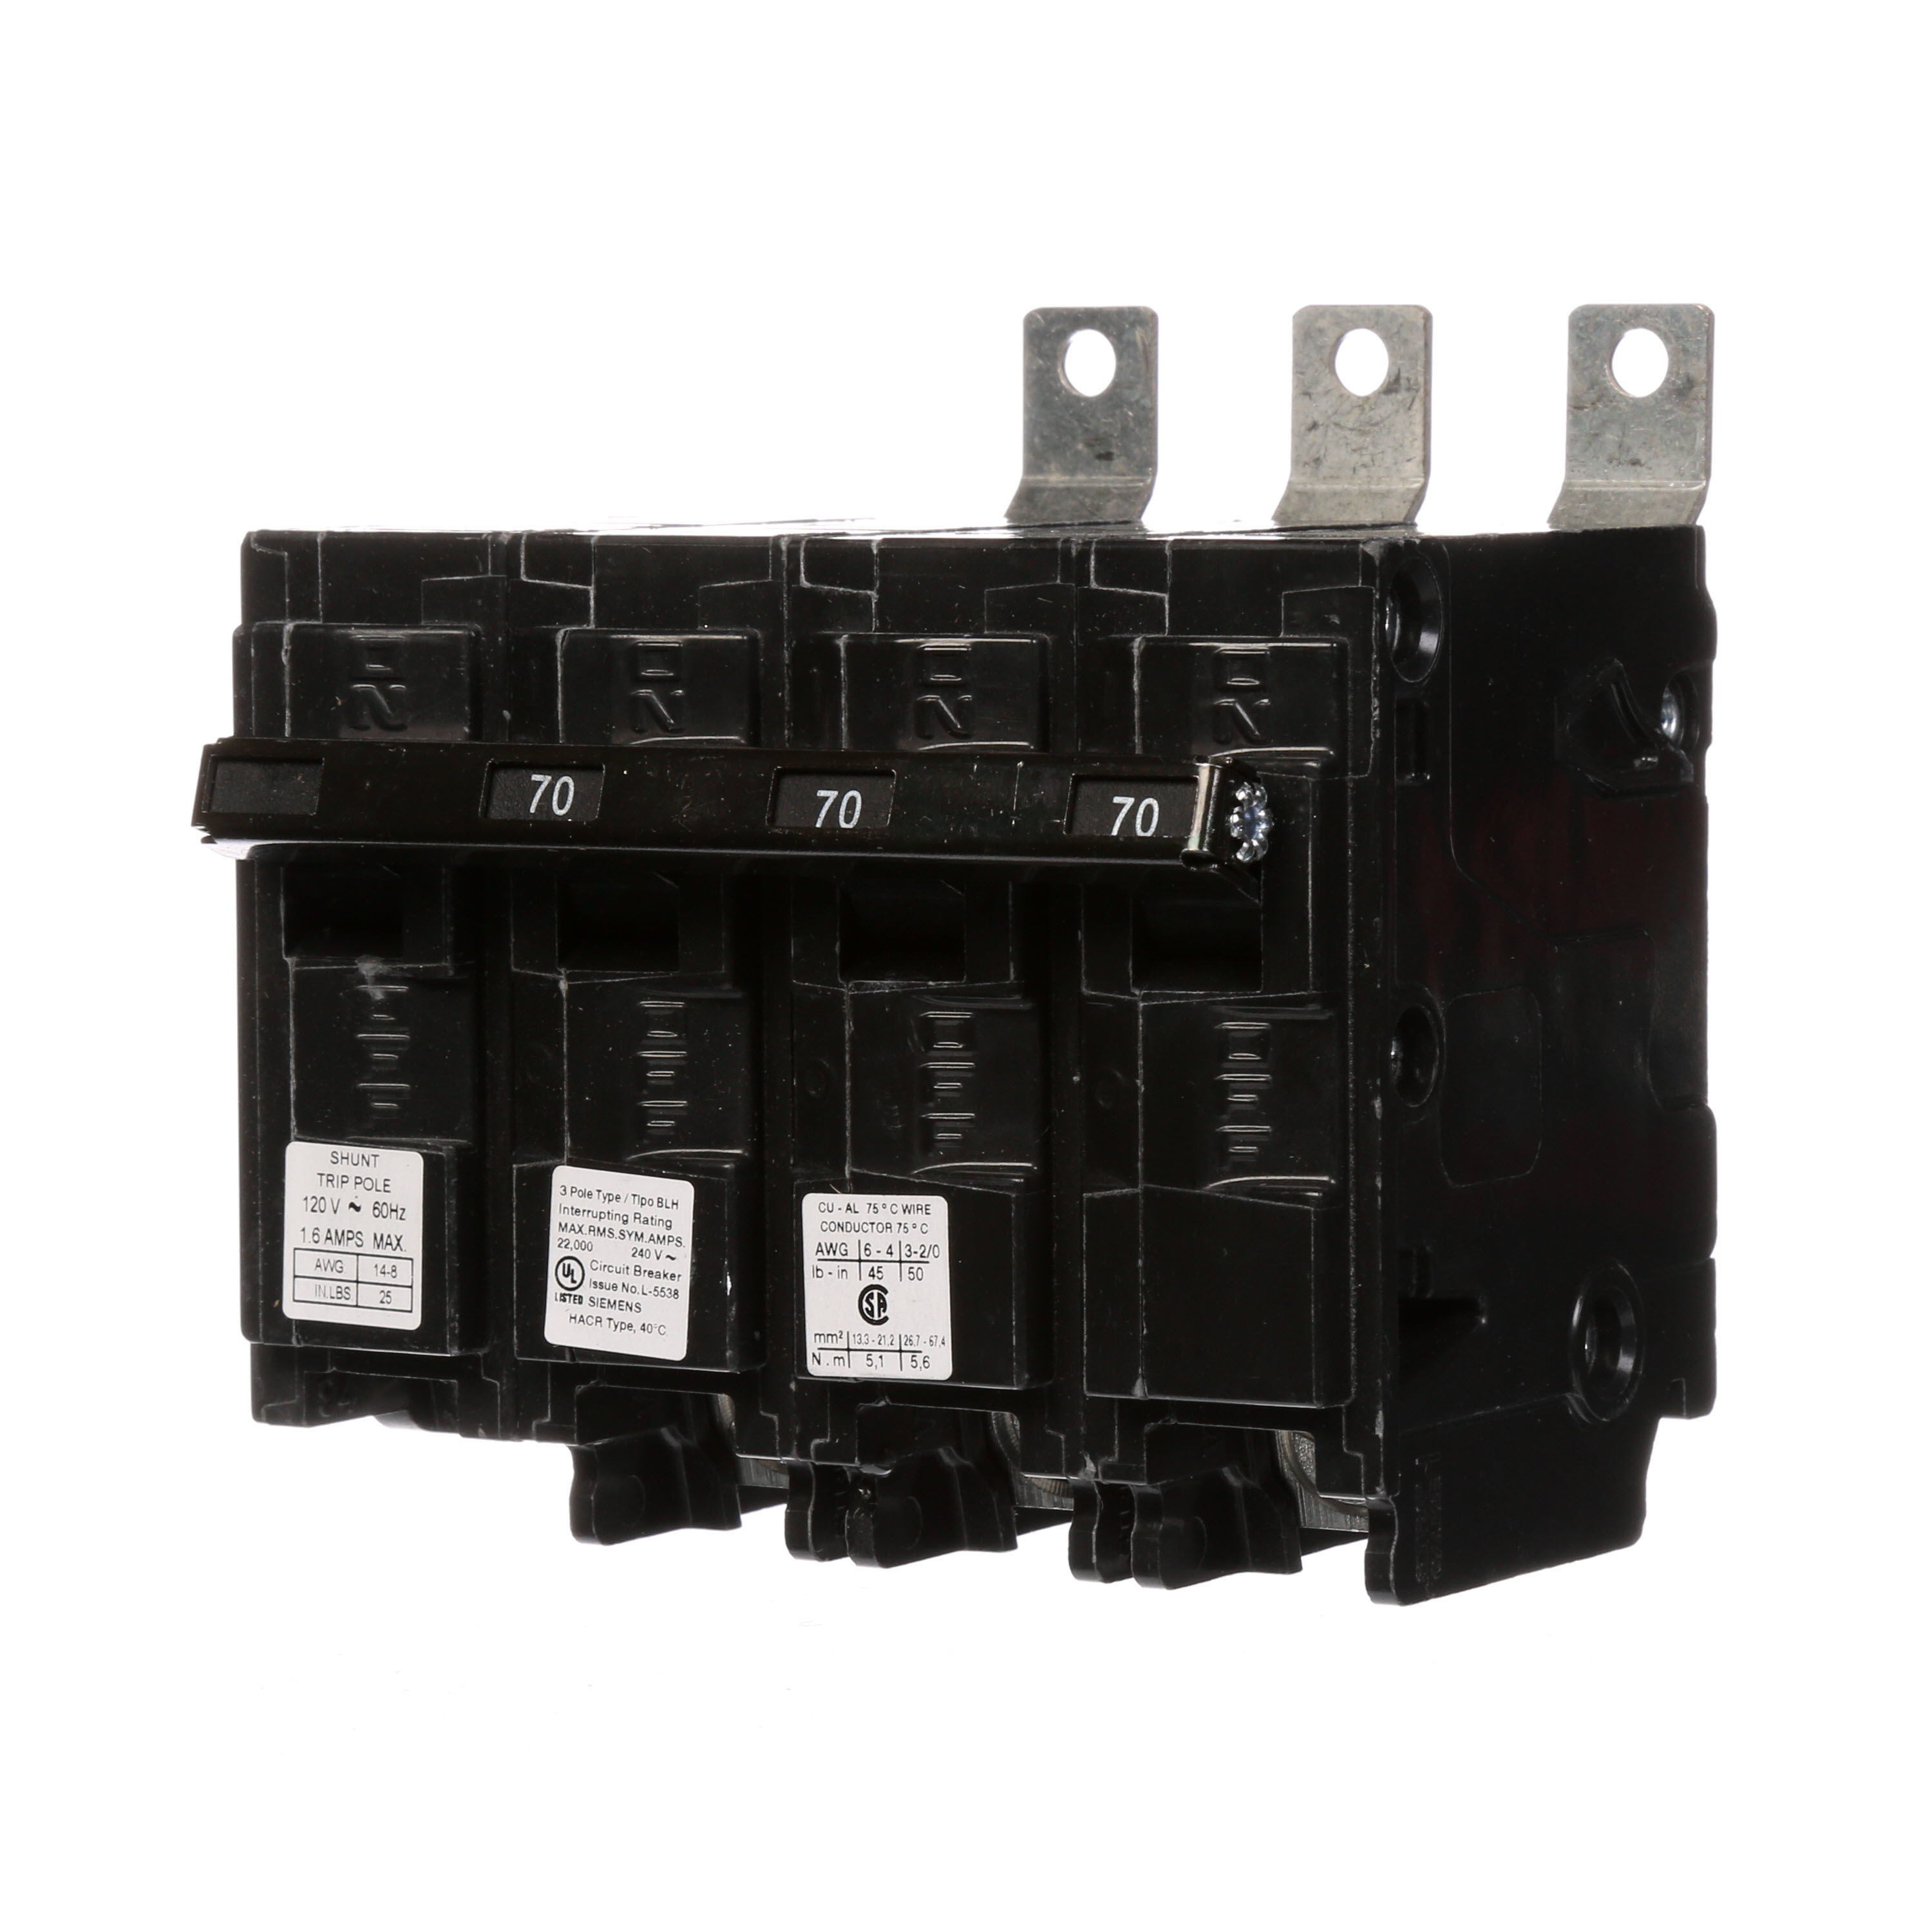 Siemens Low Voltage Molded Case Circuit Breakers Panelboard Mounting 240V Circuit Breakers - Type BL, 3-Pole, 240VAC are Circuit Protection Molded Case CircuitBreakers. Type BLH Special Features Shunt Trip 120V Application Electrical Distribution Standard UL 489 Voltage Rating 120/240V Amperage Rating 70A Trip Range Thermal Magnetic Interrupt Rating 22 AIC Number Of Poles 3P